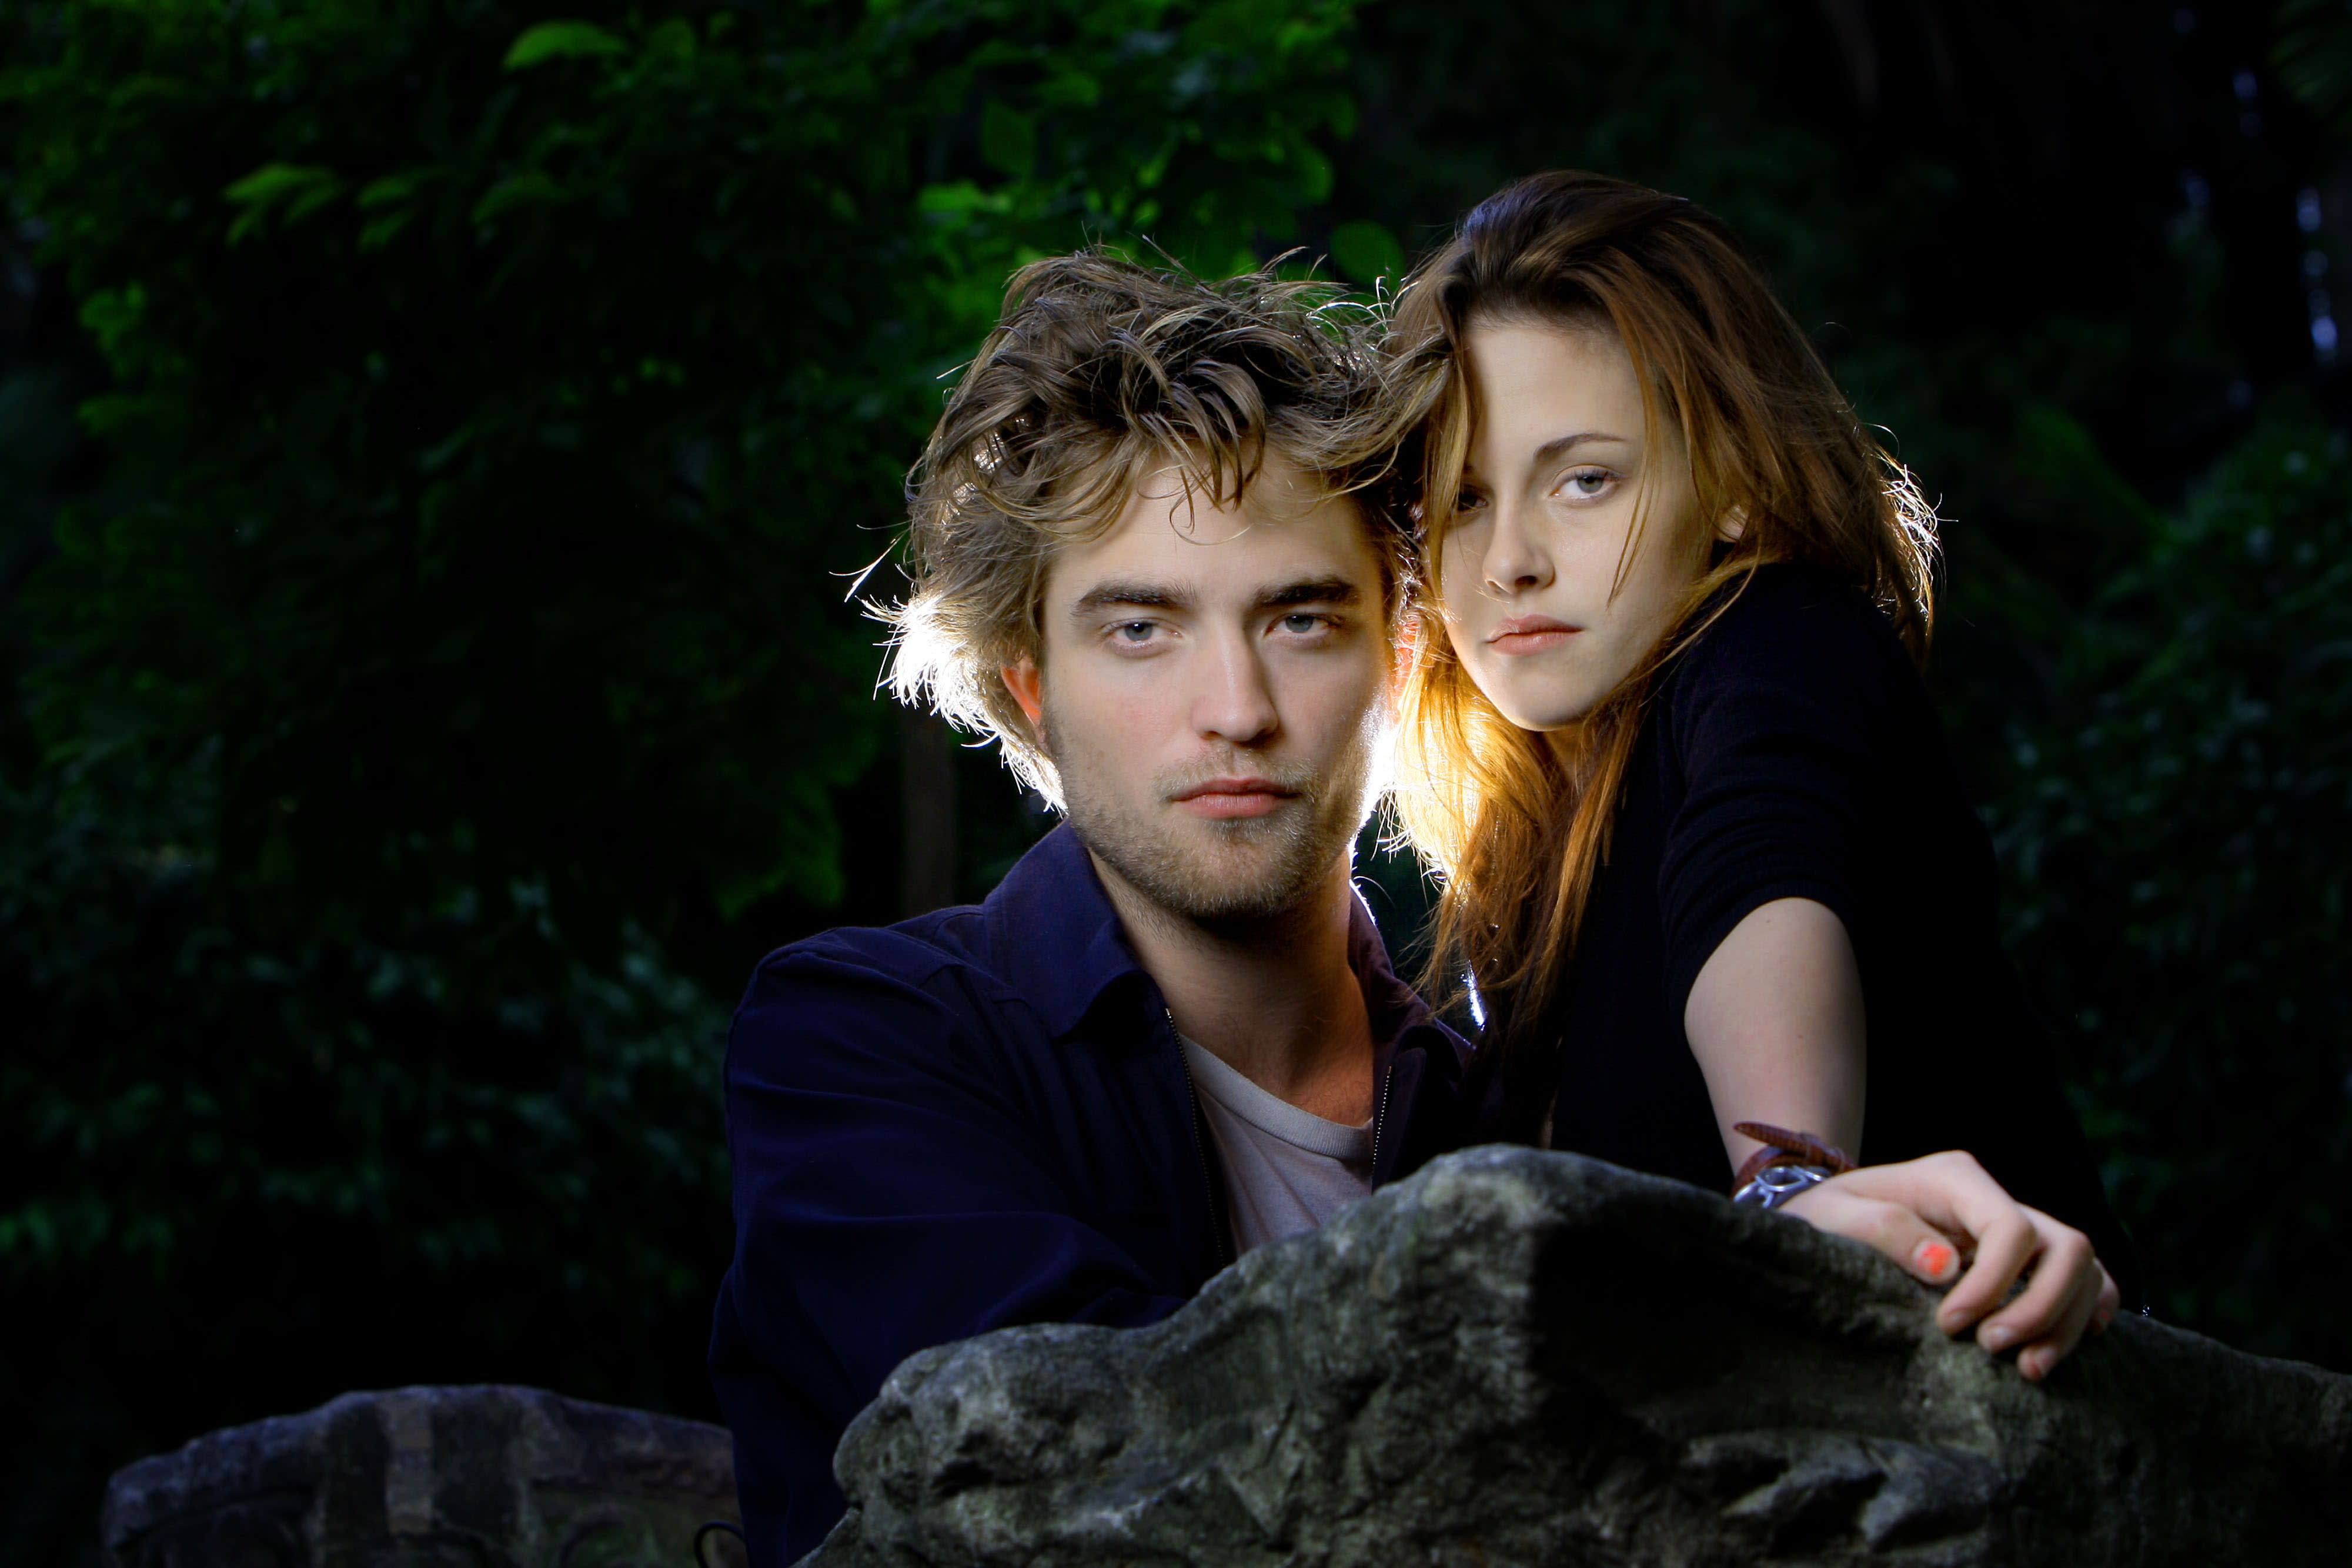 New "Twilight" Book "Midnight Sun" Gets Release Date From Stephenie Meyer